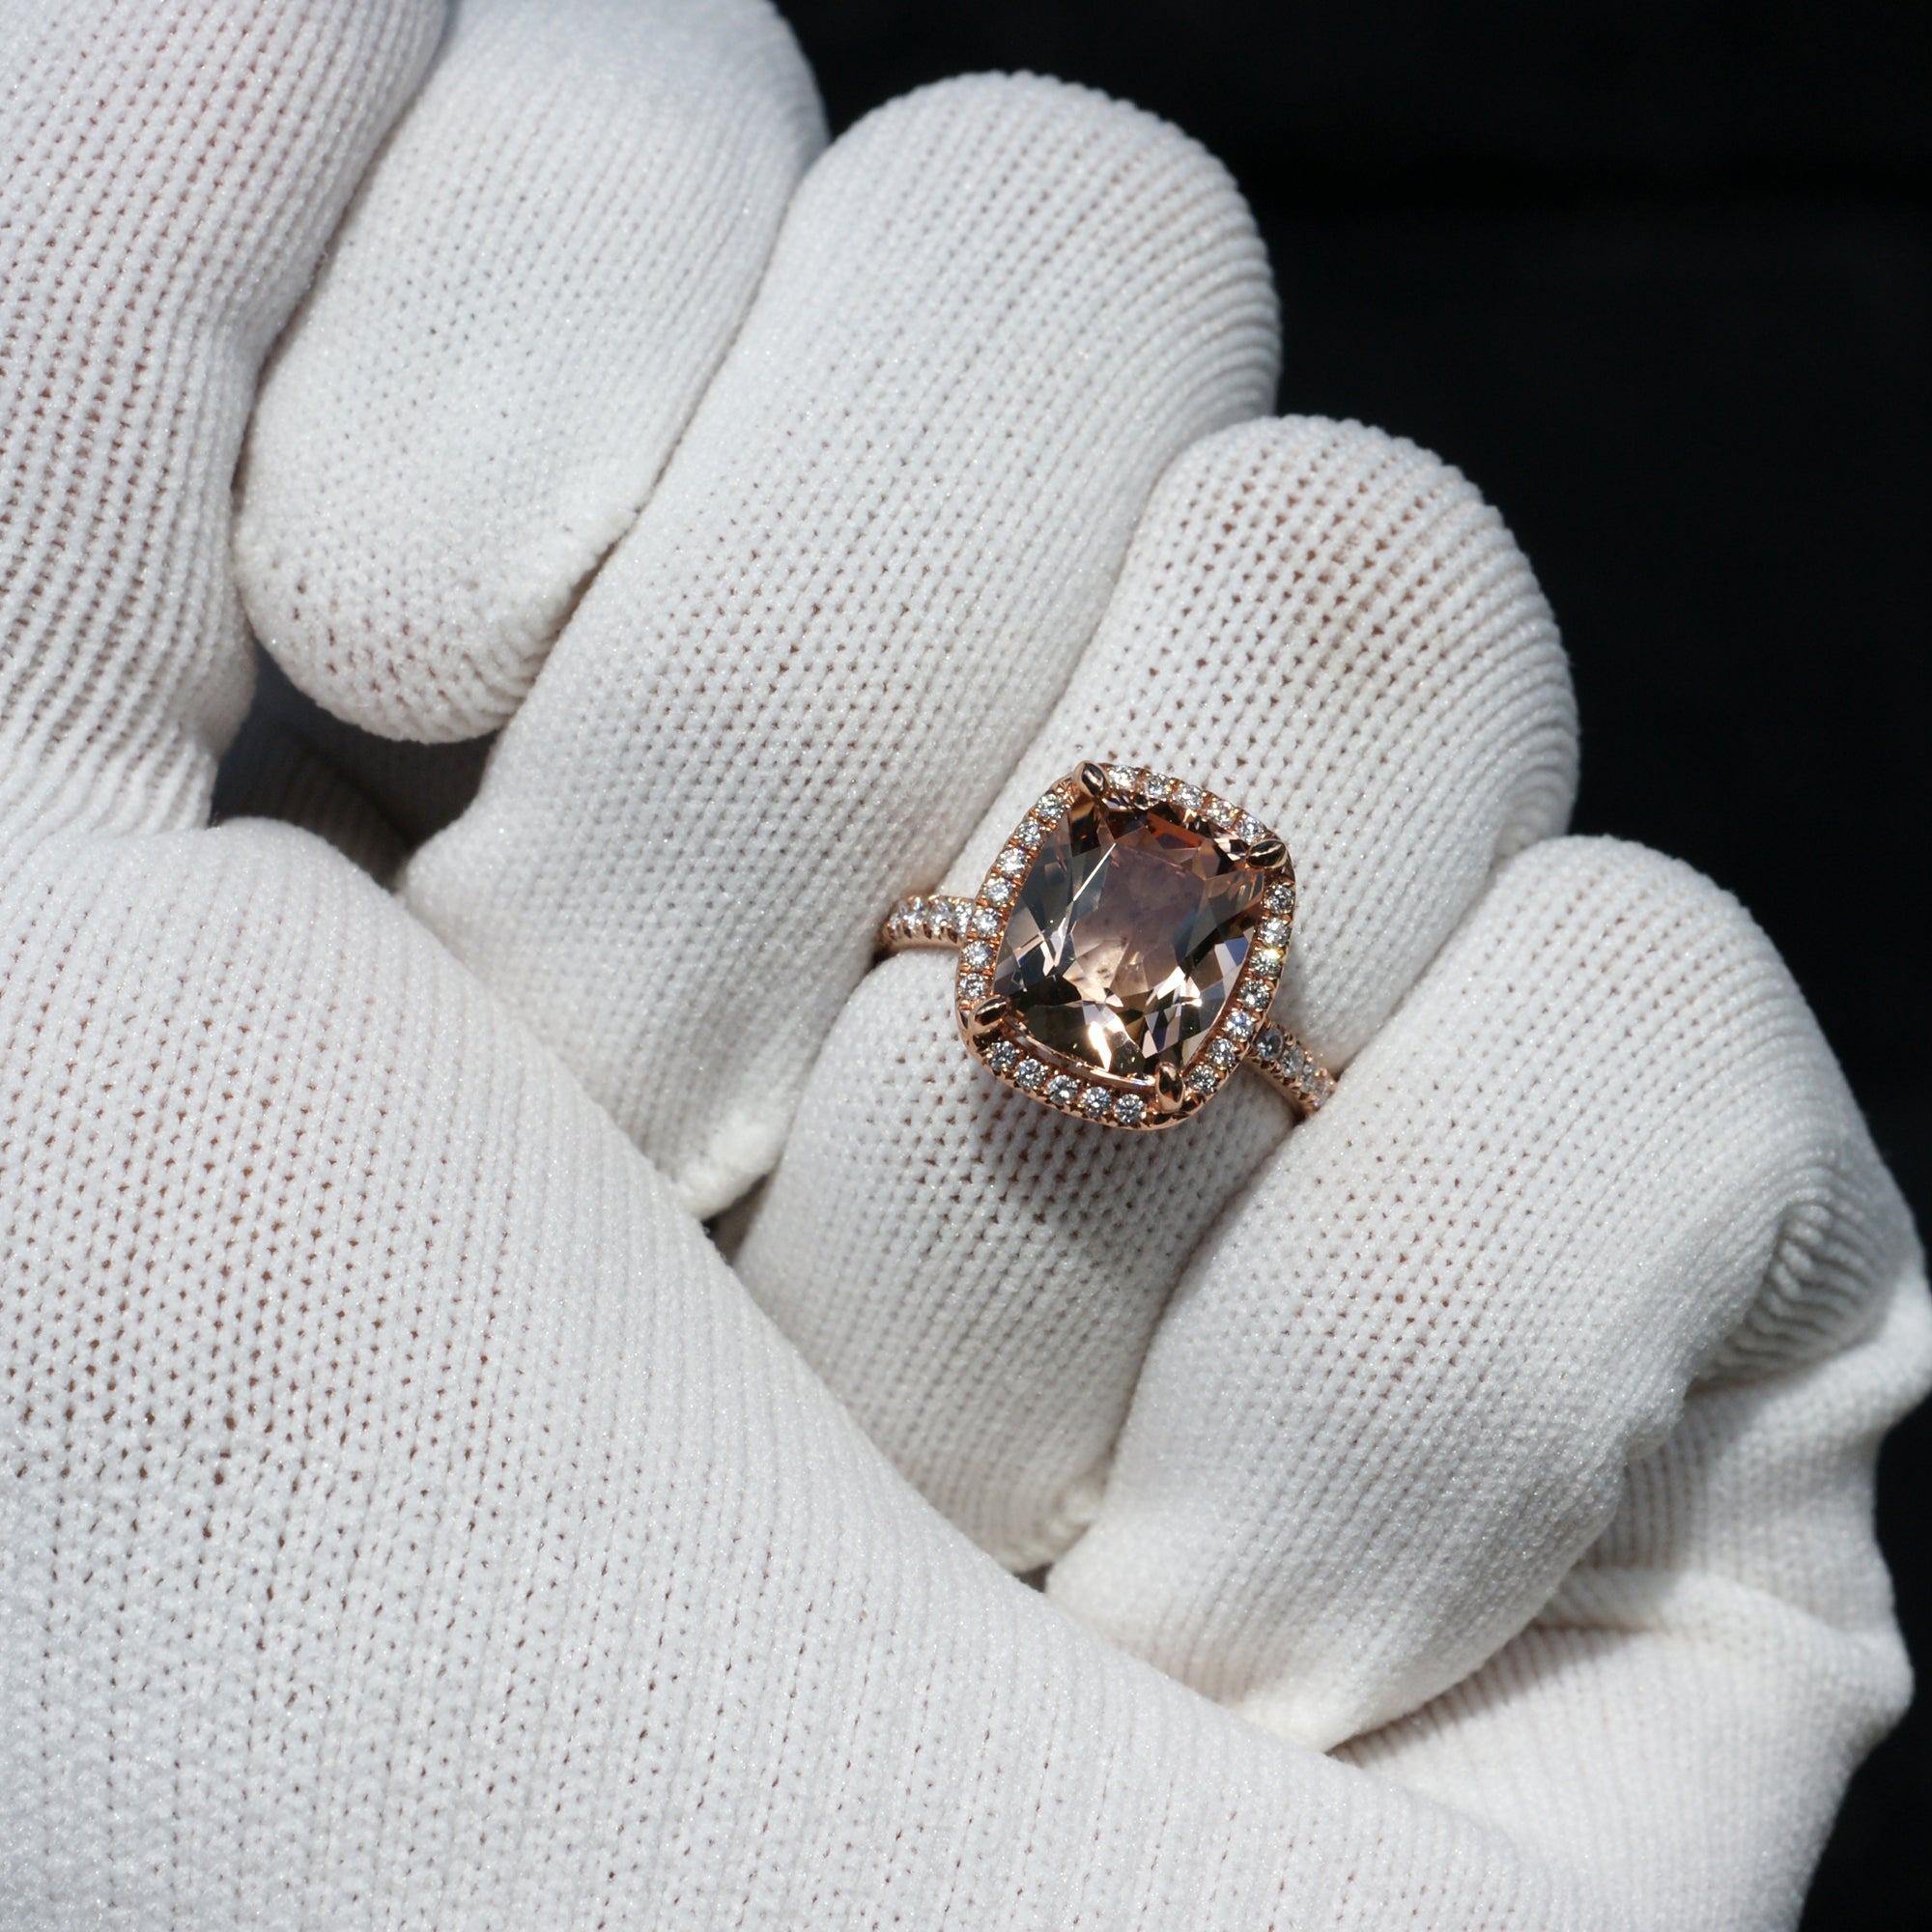 Cushion Morganite Ring 14k Rose Gold 11x9mm - The Drenched